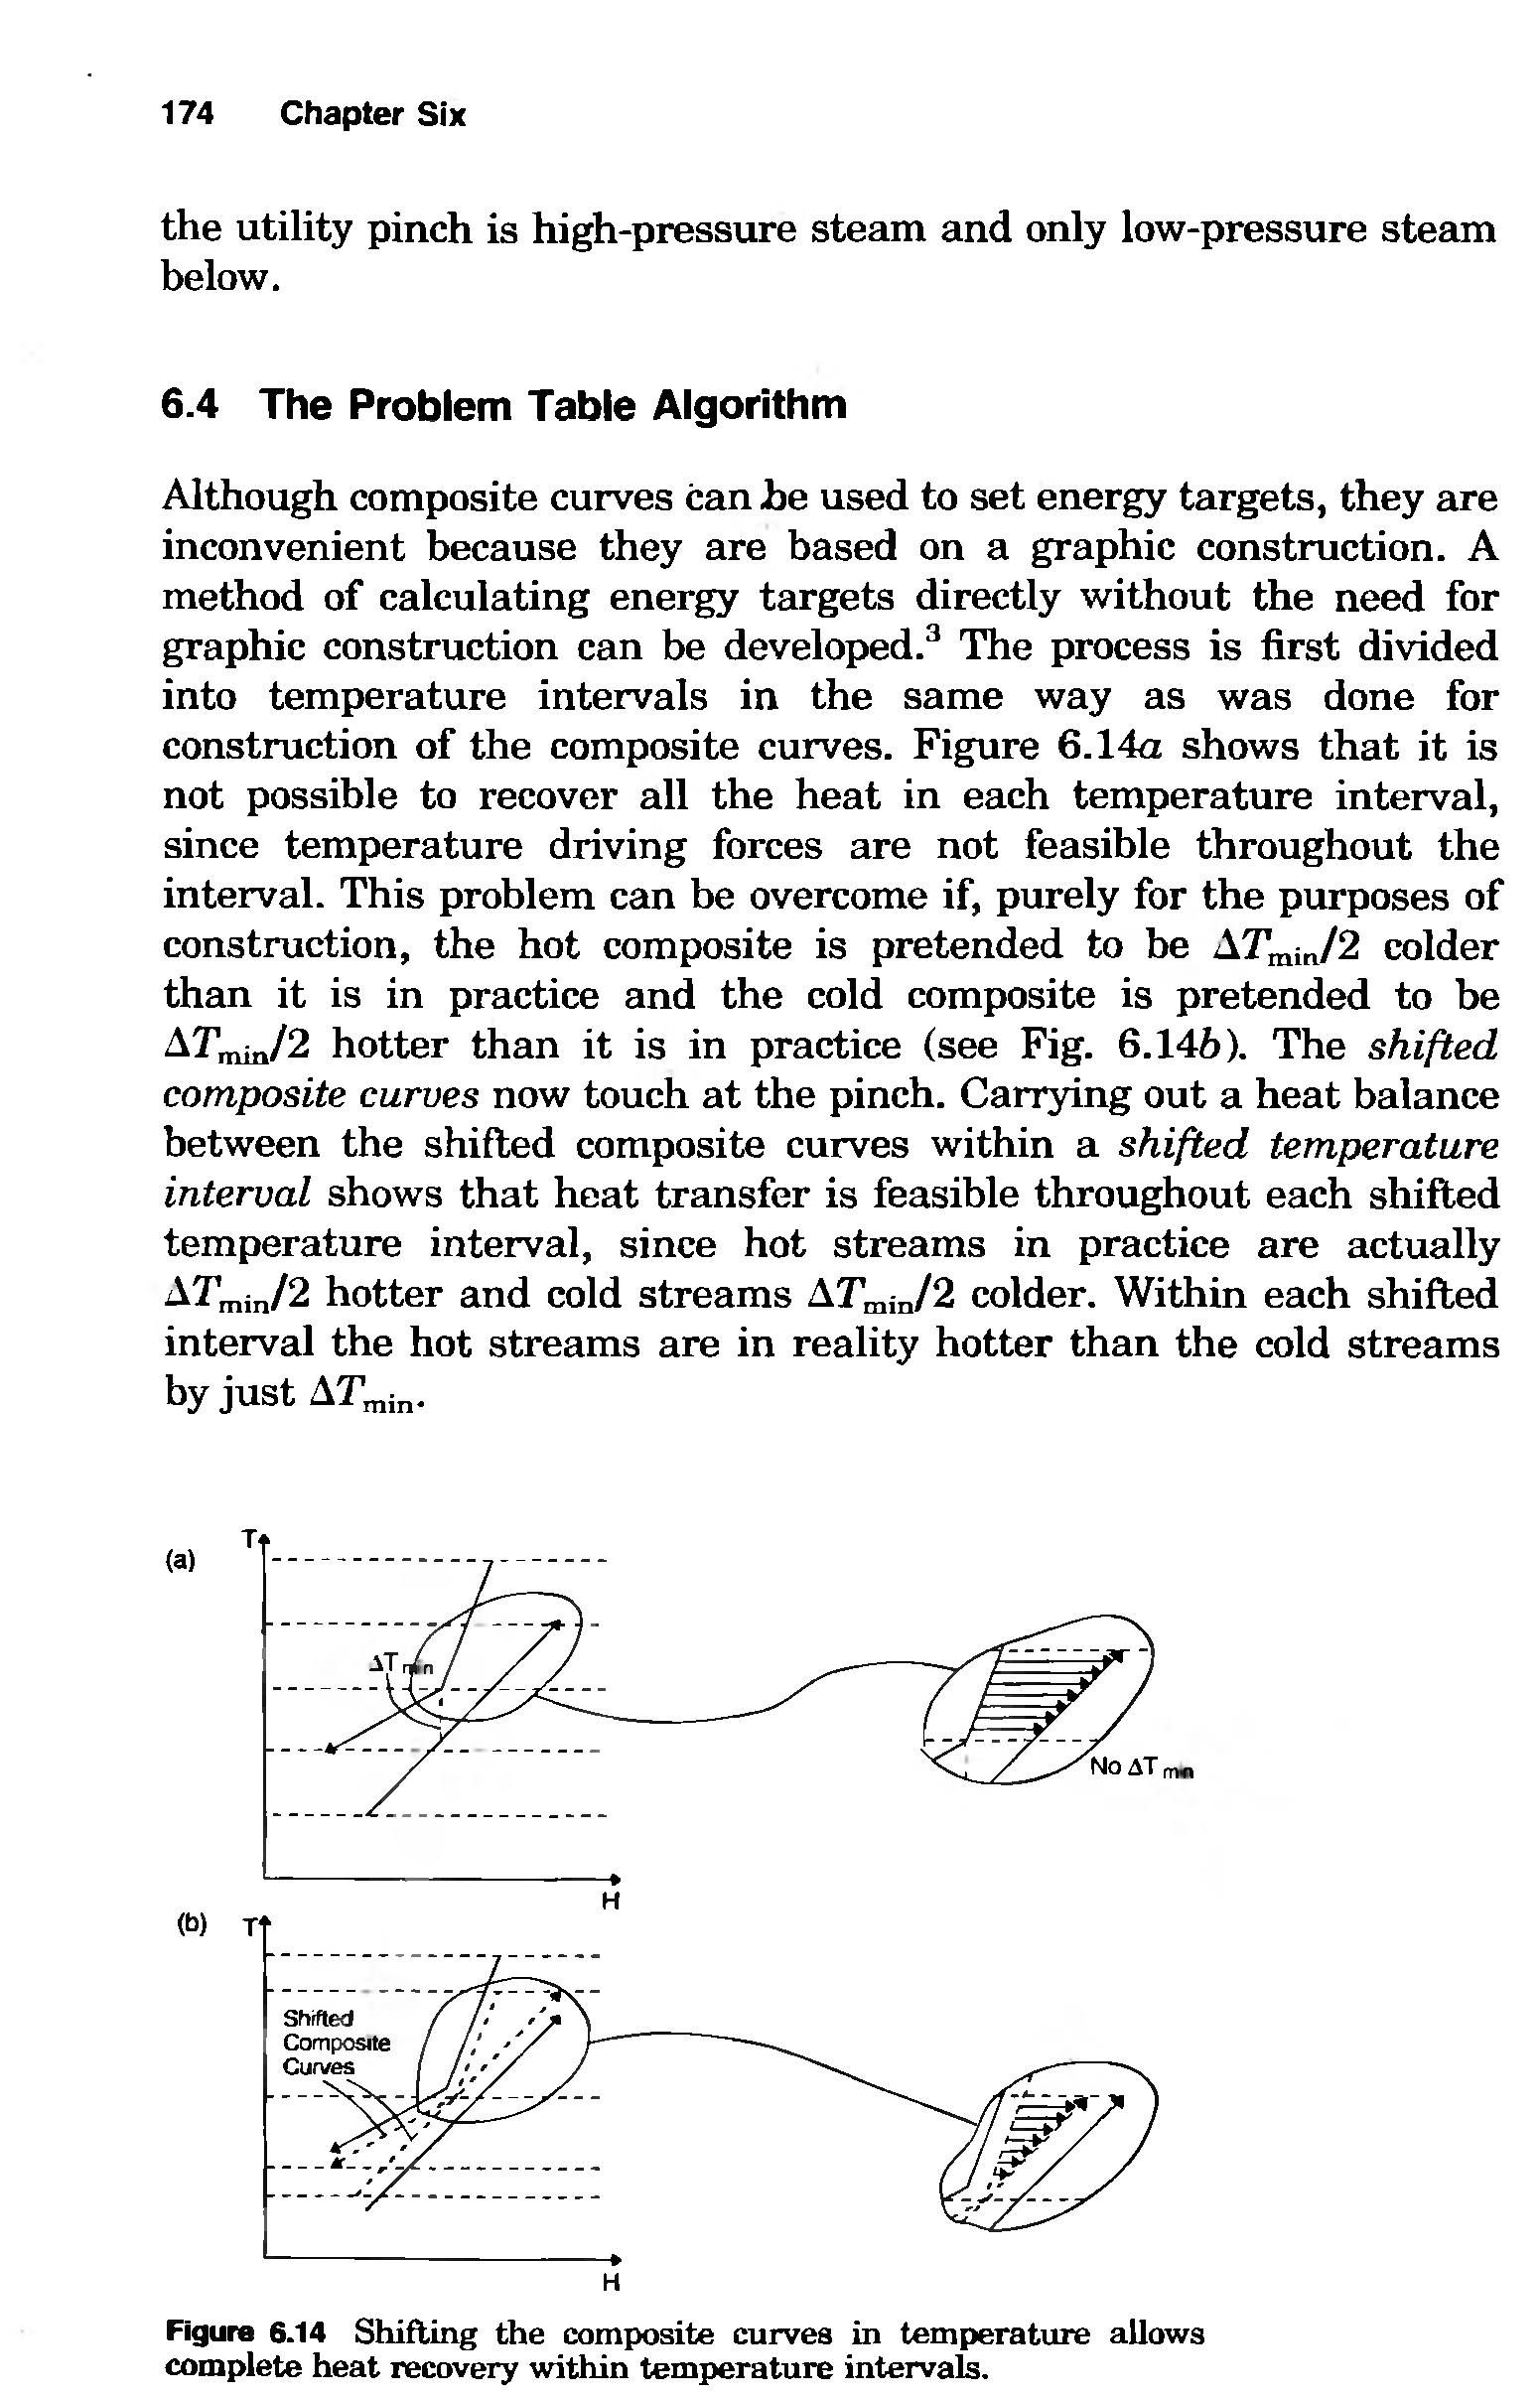 Figure 6.14 Shifting the composite curves in temperature allows complete heat recovery within temperature intervals.